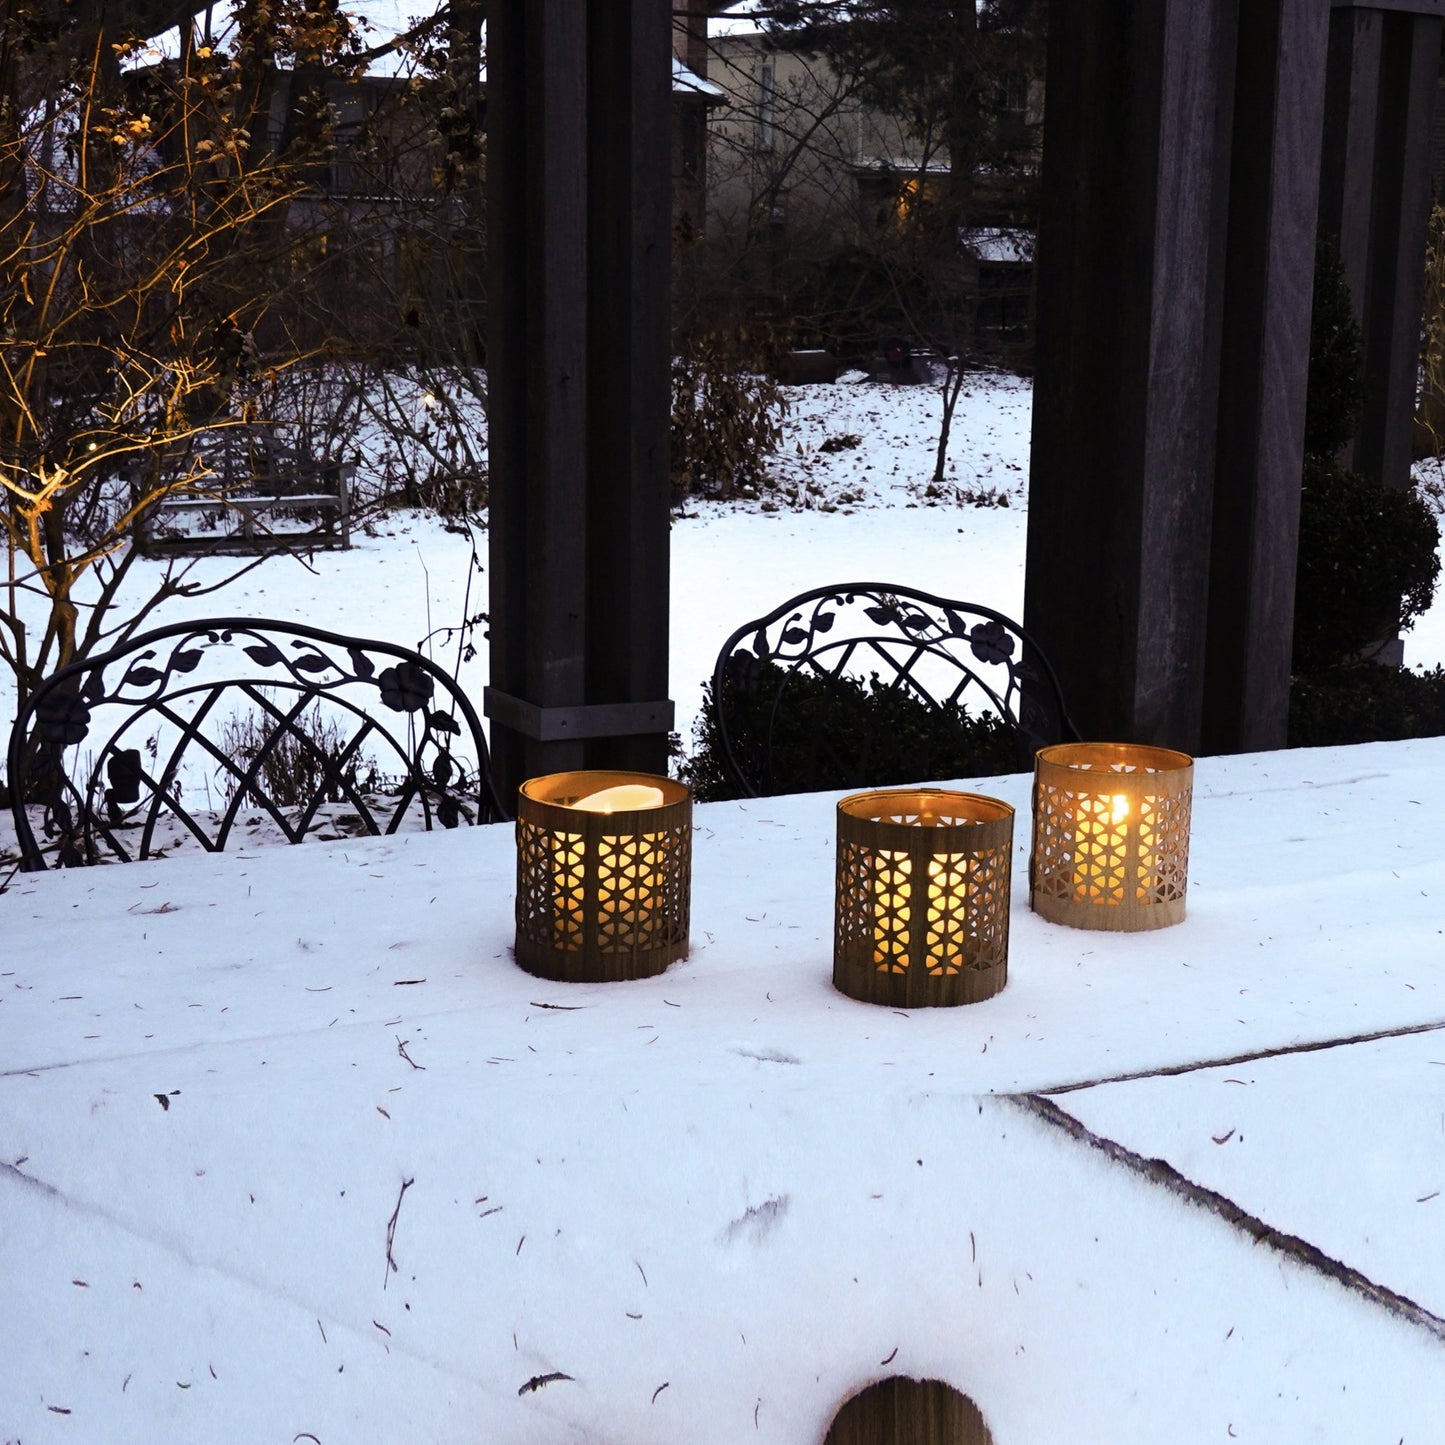 Three mid century modern lanterns in size medium in black walnut, white oak and maple in a table covered with a dusting of snow